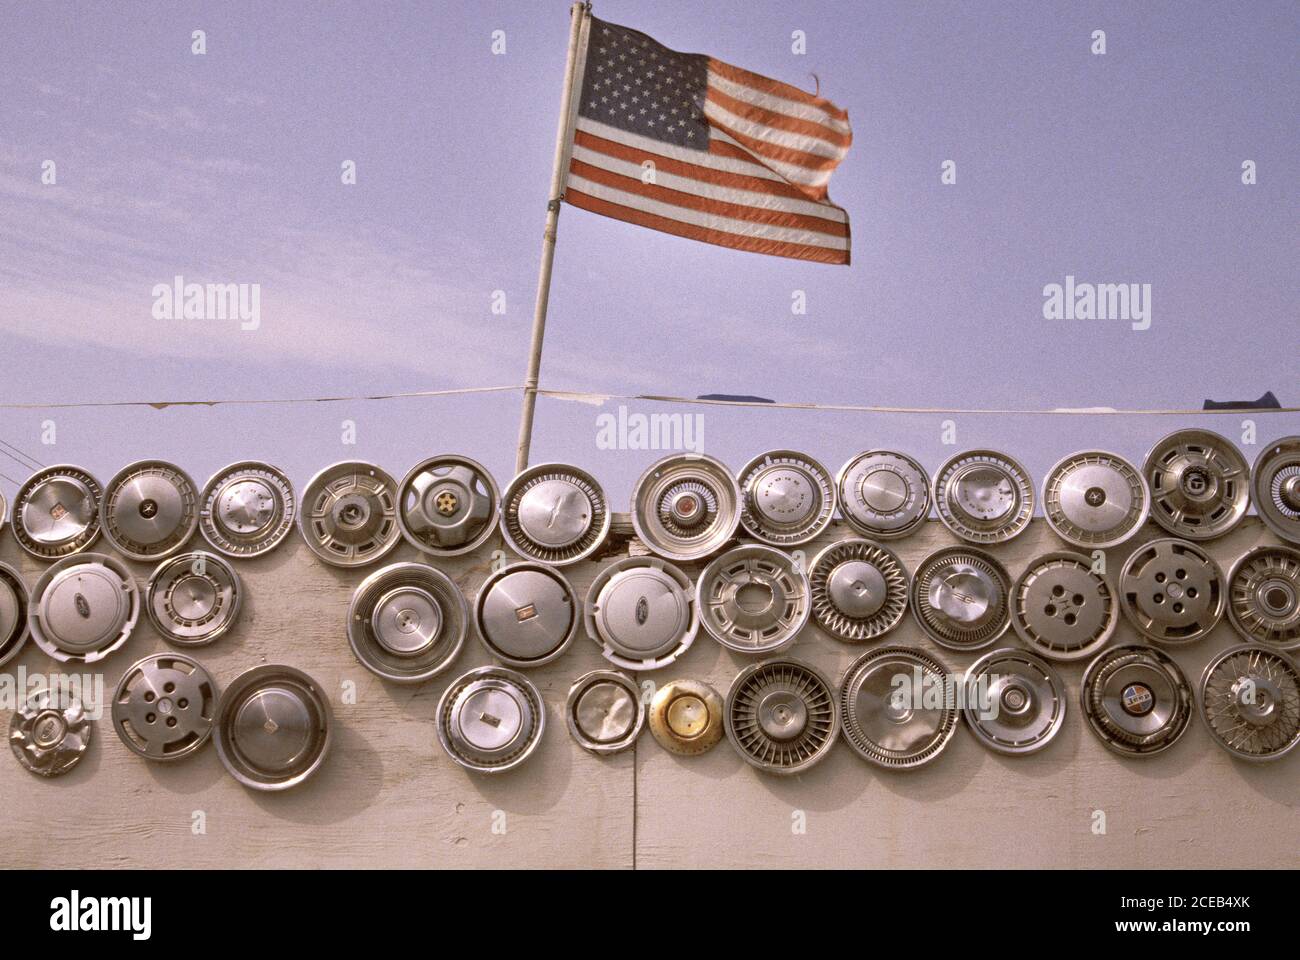 American flag flying over hubcaps. Stock Photo